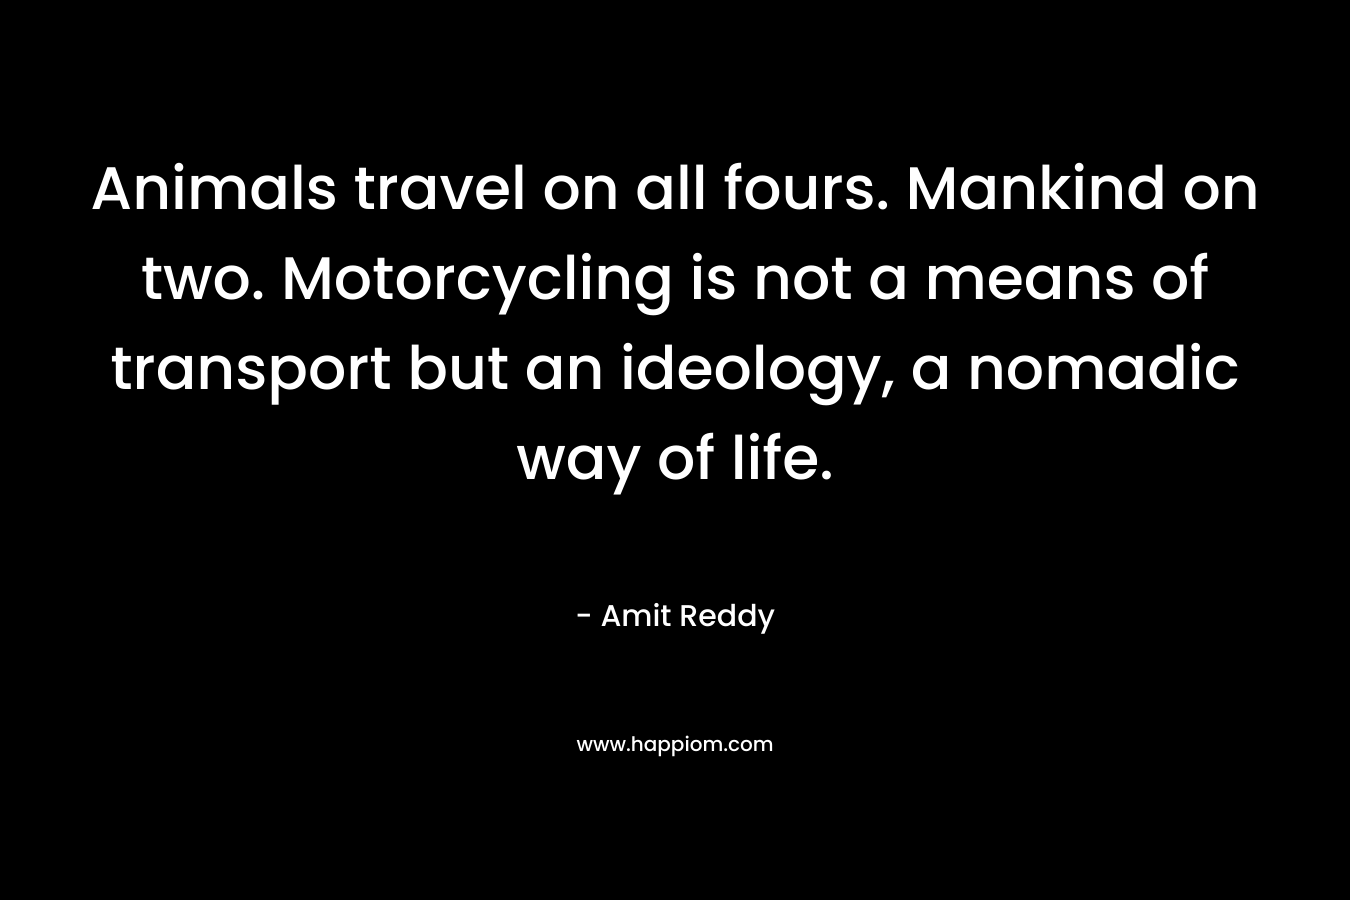 Animals travel on all fours. Mankind on two. Motorcycling is not a means of transport but an ideology, a nomadic way of life. – Amit Reddy